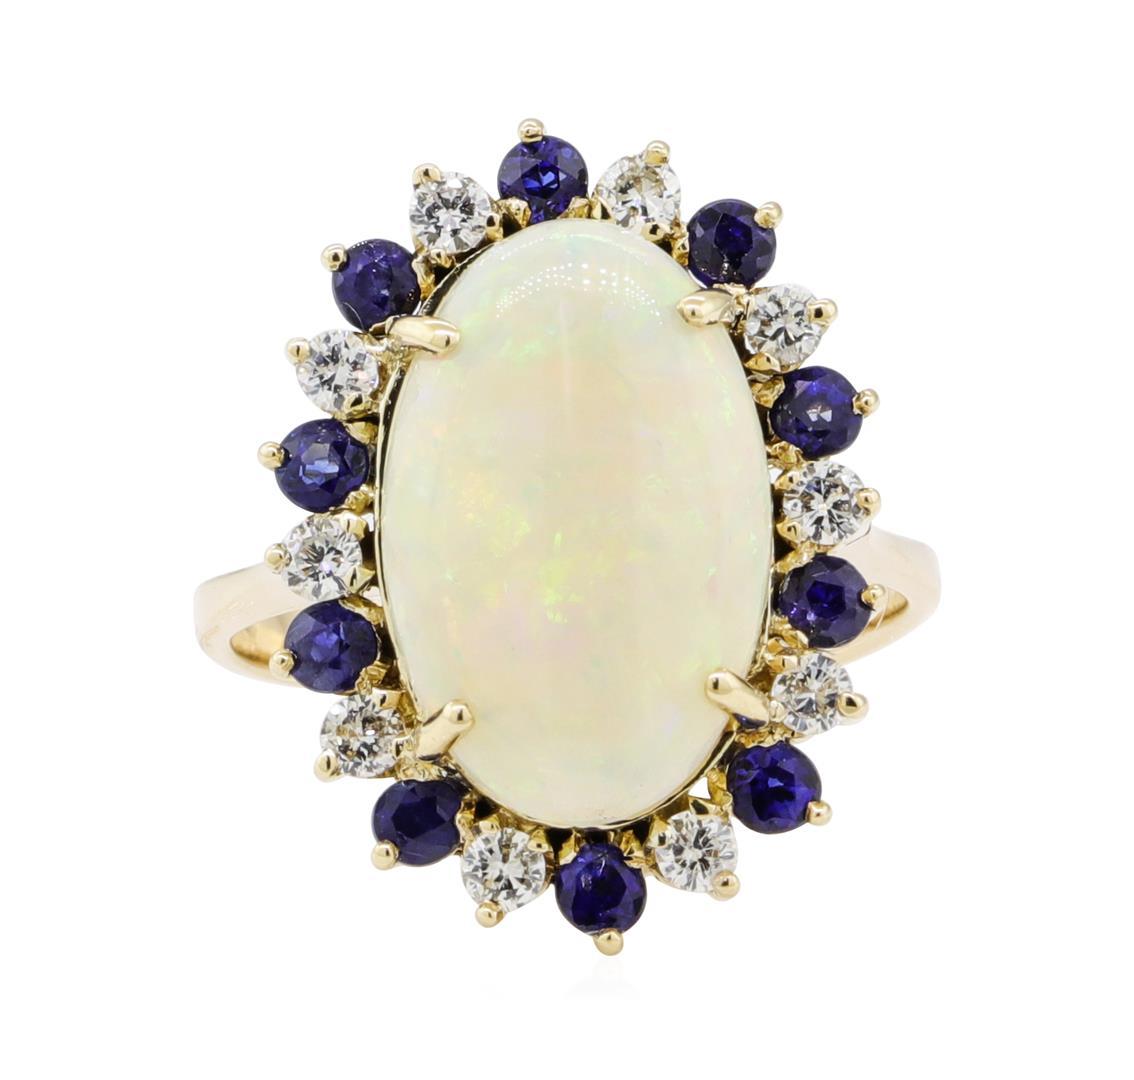 4.80 ctw Opal, Sapphire, and Diamond Ring - 14KT Yellow Gold